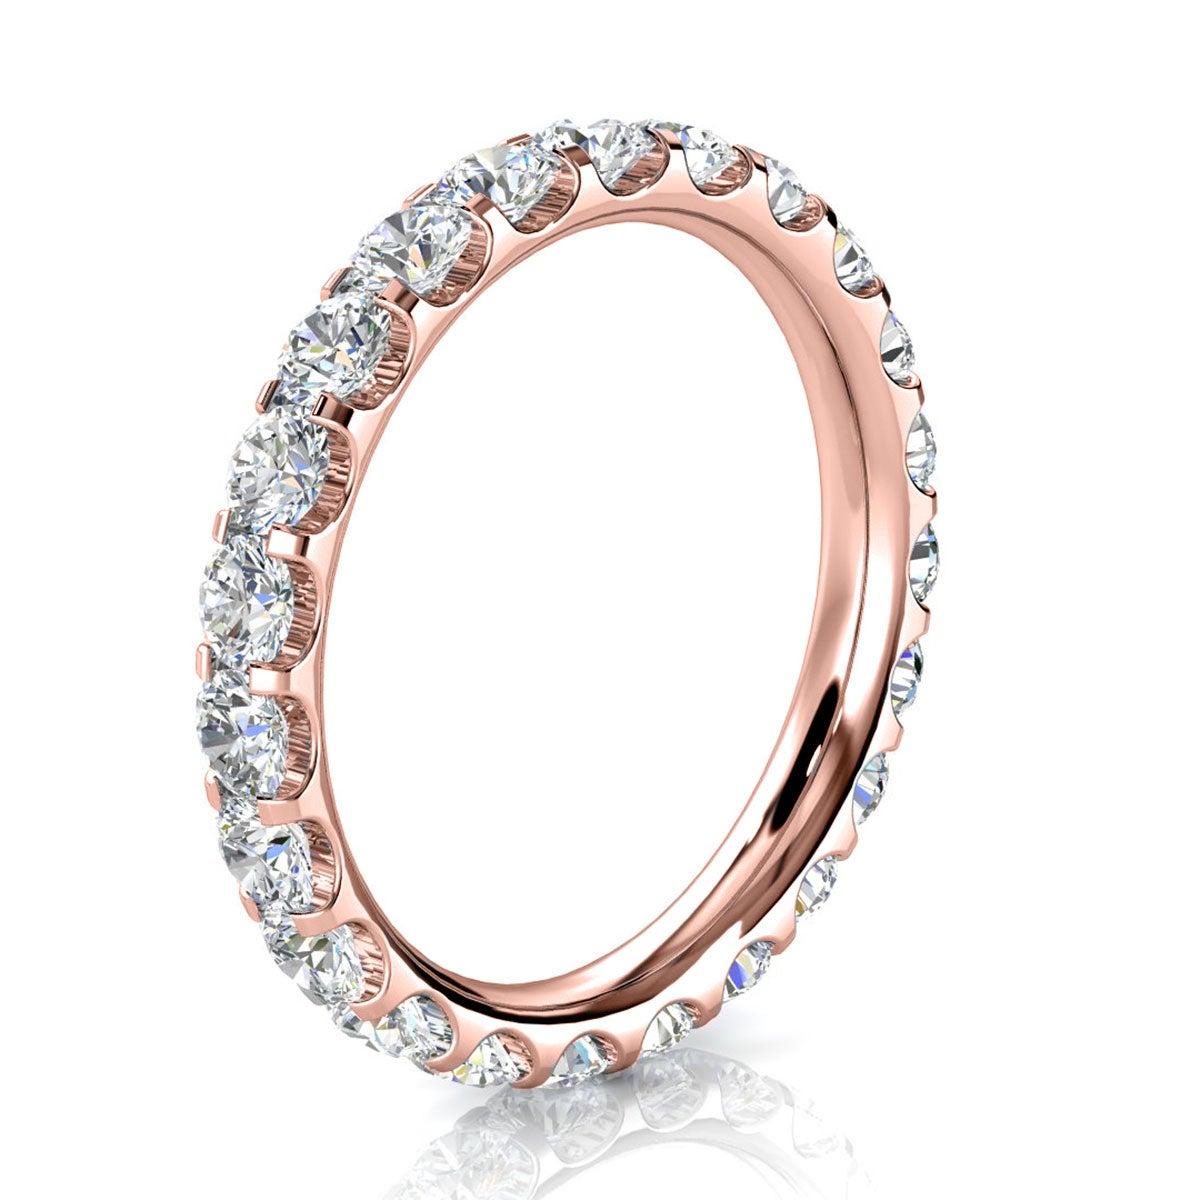 For Sale:  18k Rose Gold Viola Eternity Micro-Prong Diamond Ring '1 1/2 Ct. Tw' 2